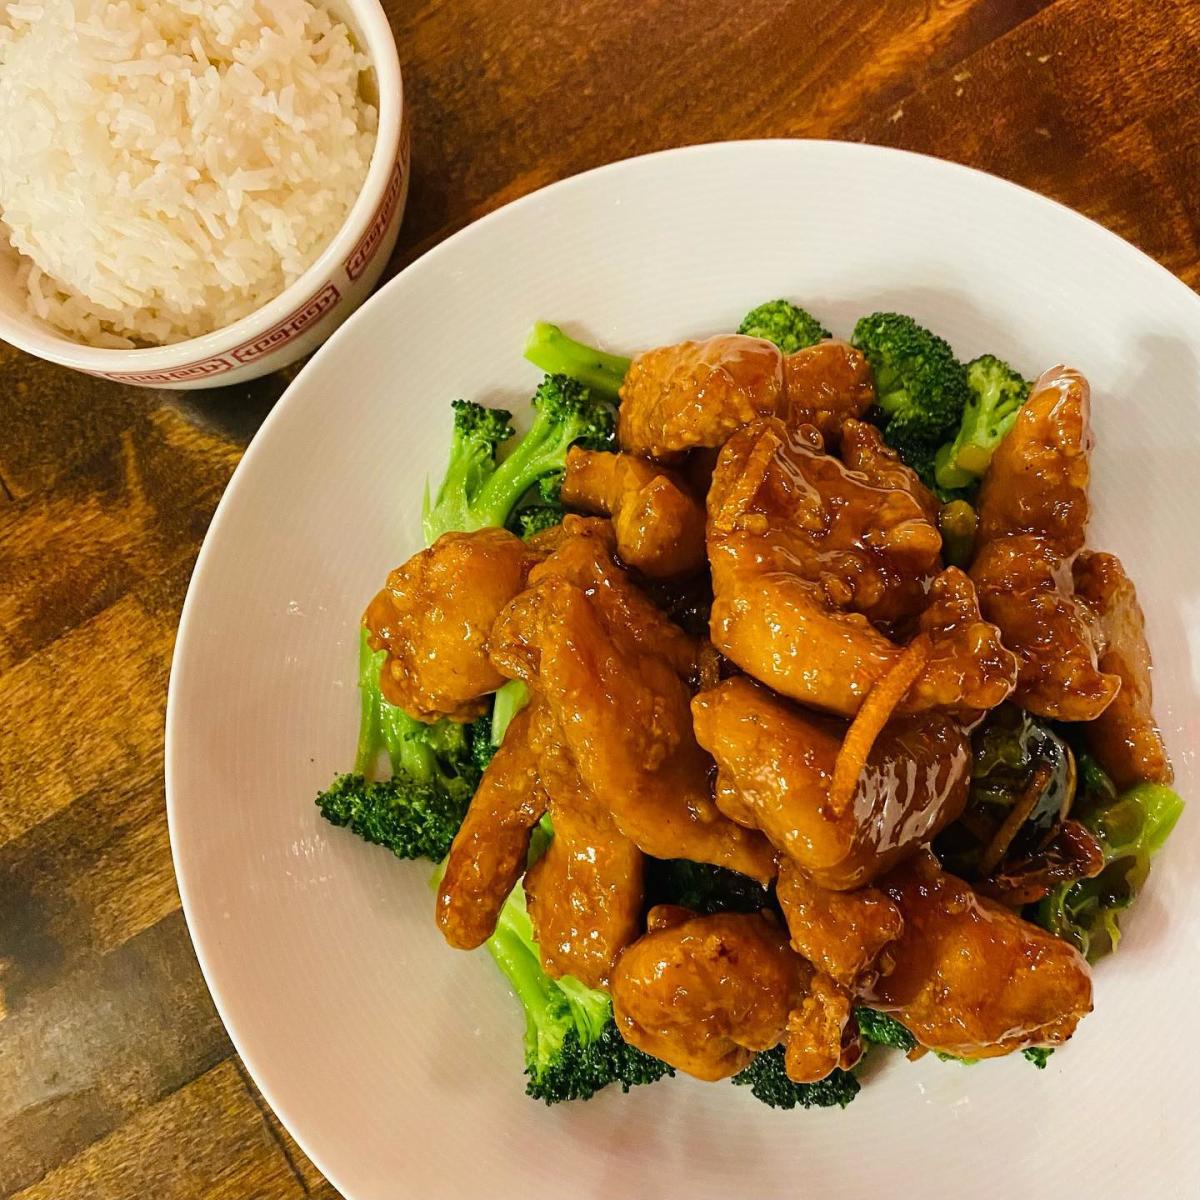 Orange chicken on a bed of broccoli and white rice on the side at Little Palace